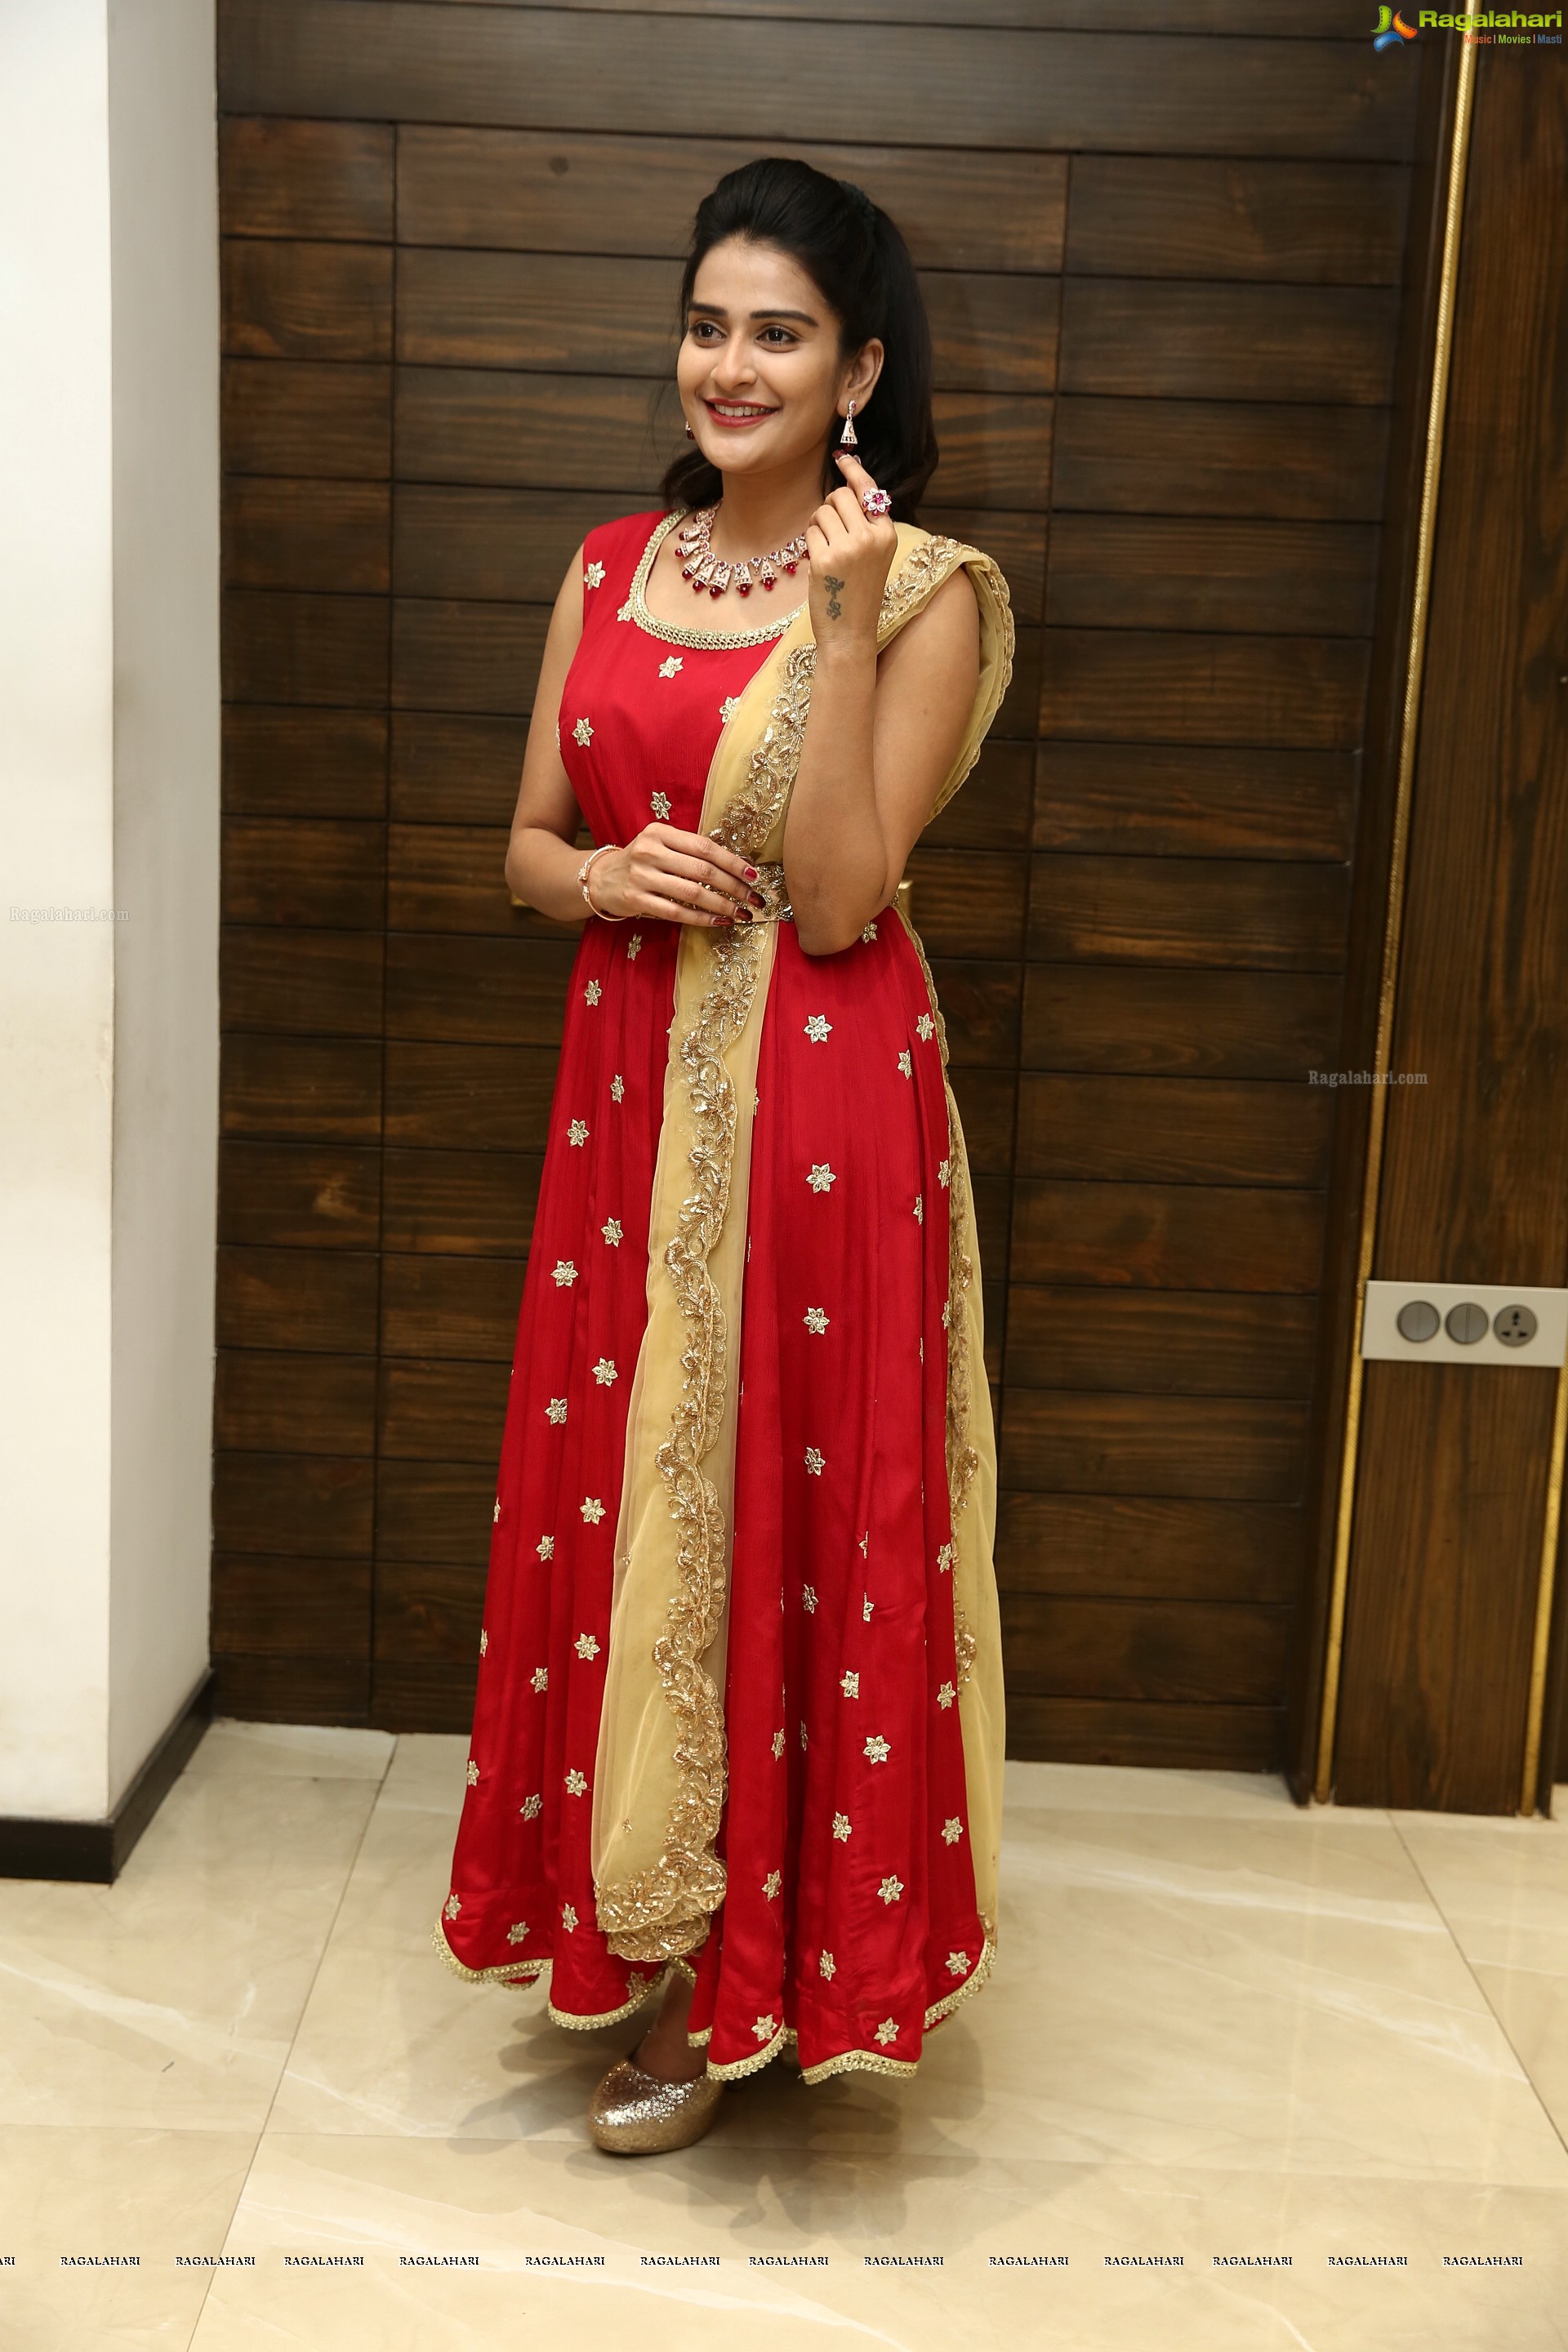 Jenney Honey @ Aalayam Collection Launch at PMJ Jewels - HD Gallery